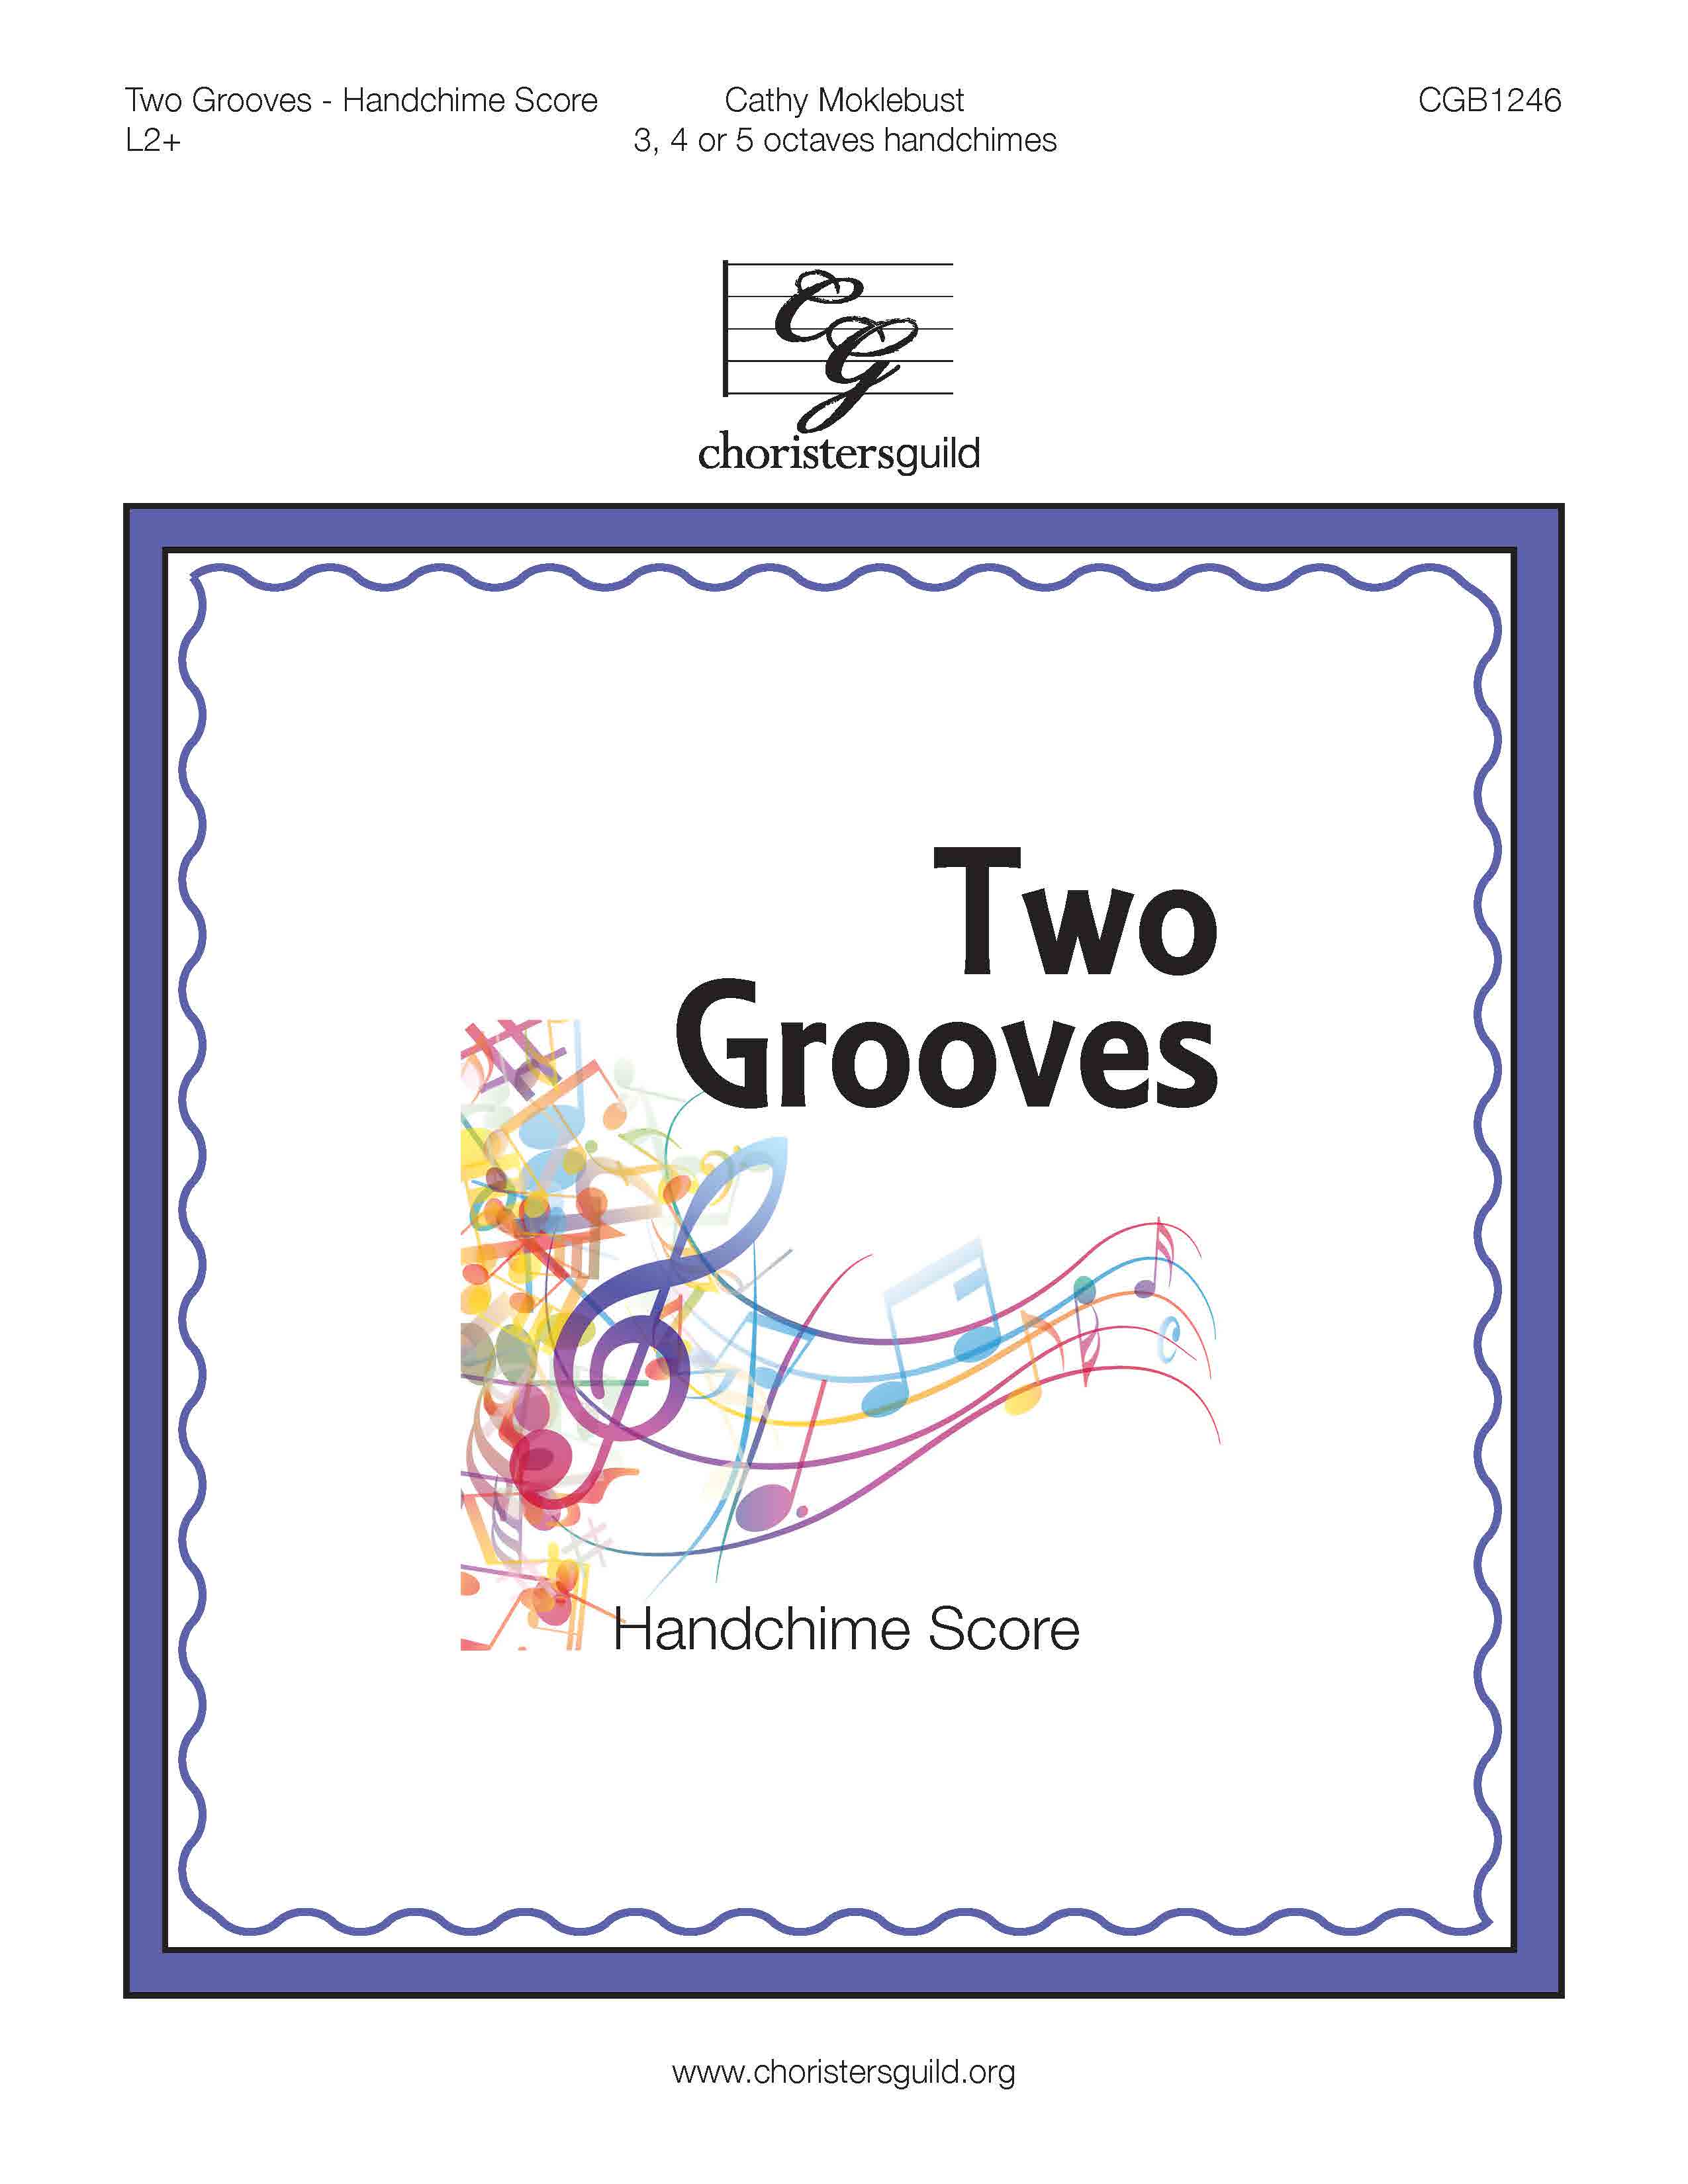 Two Grooves (Handchime Score)